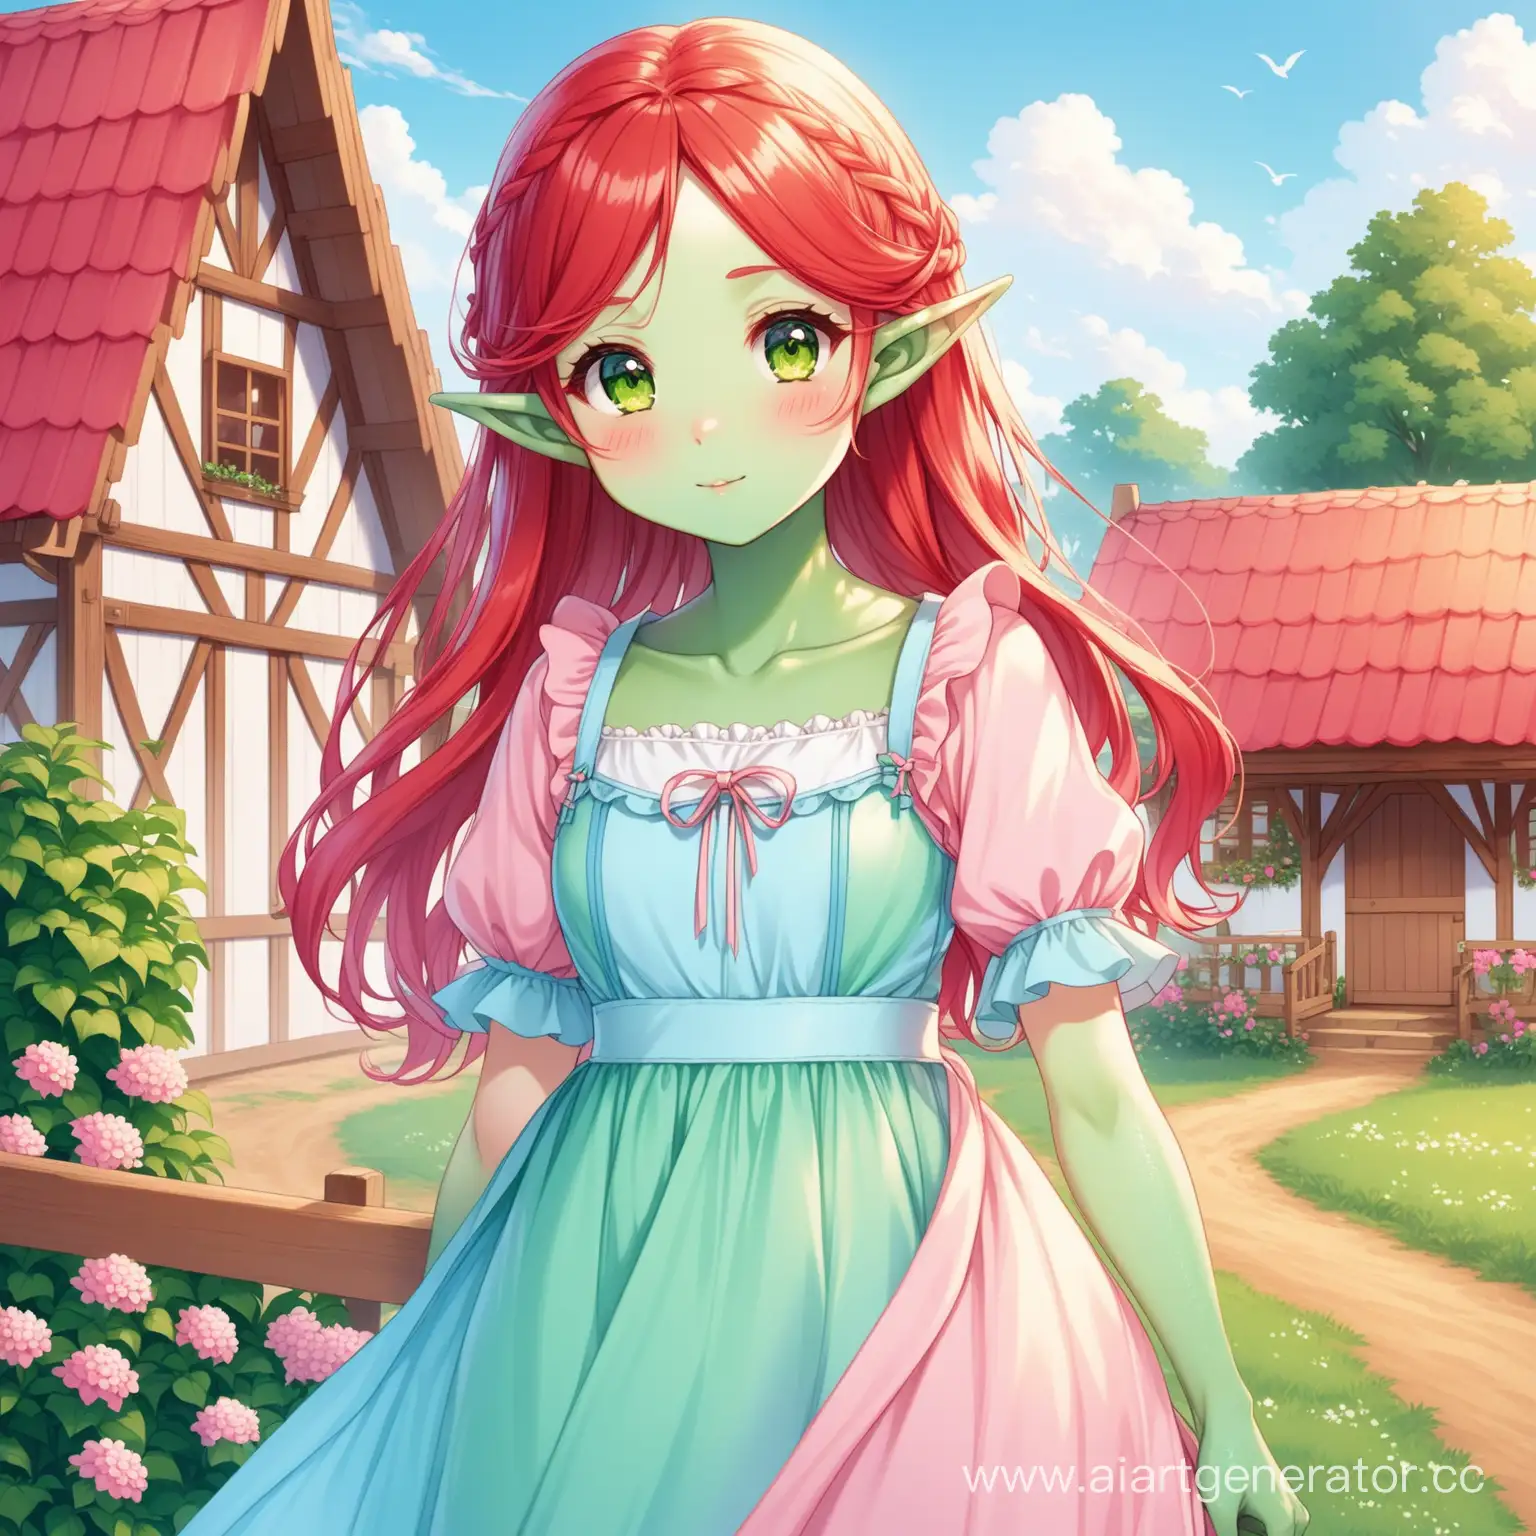 Enchanting-Elf-Girl-with-Green-Skin-and-Red-Hair-in-Pastel-Blue-and-Pink-Dress-in-Cottage-Style-Setting